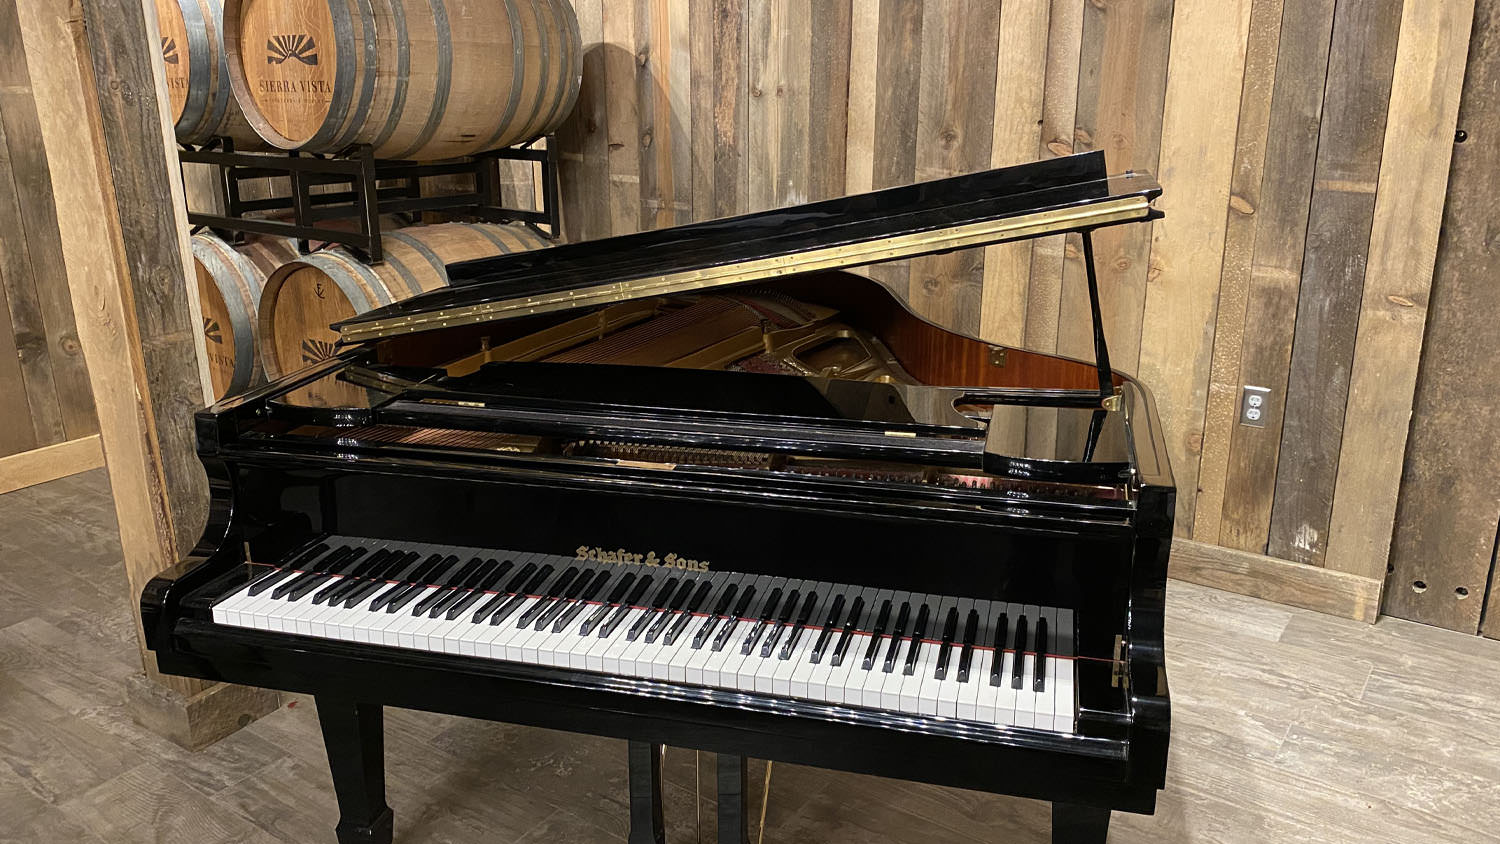 Schafer & Sons Piano in Event Room at Sierra Vista Winery